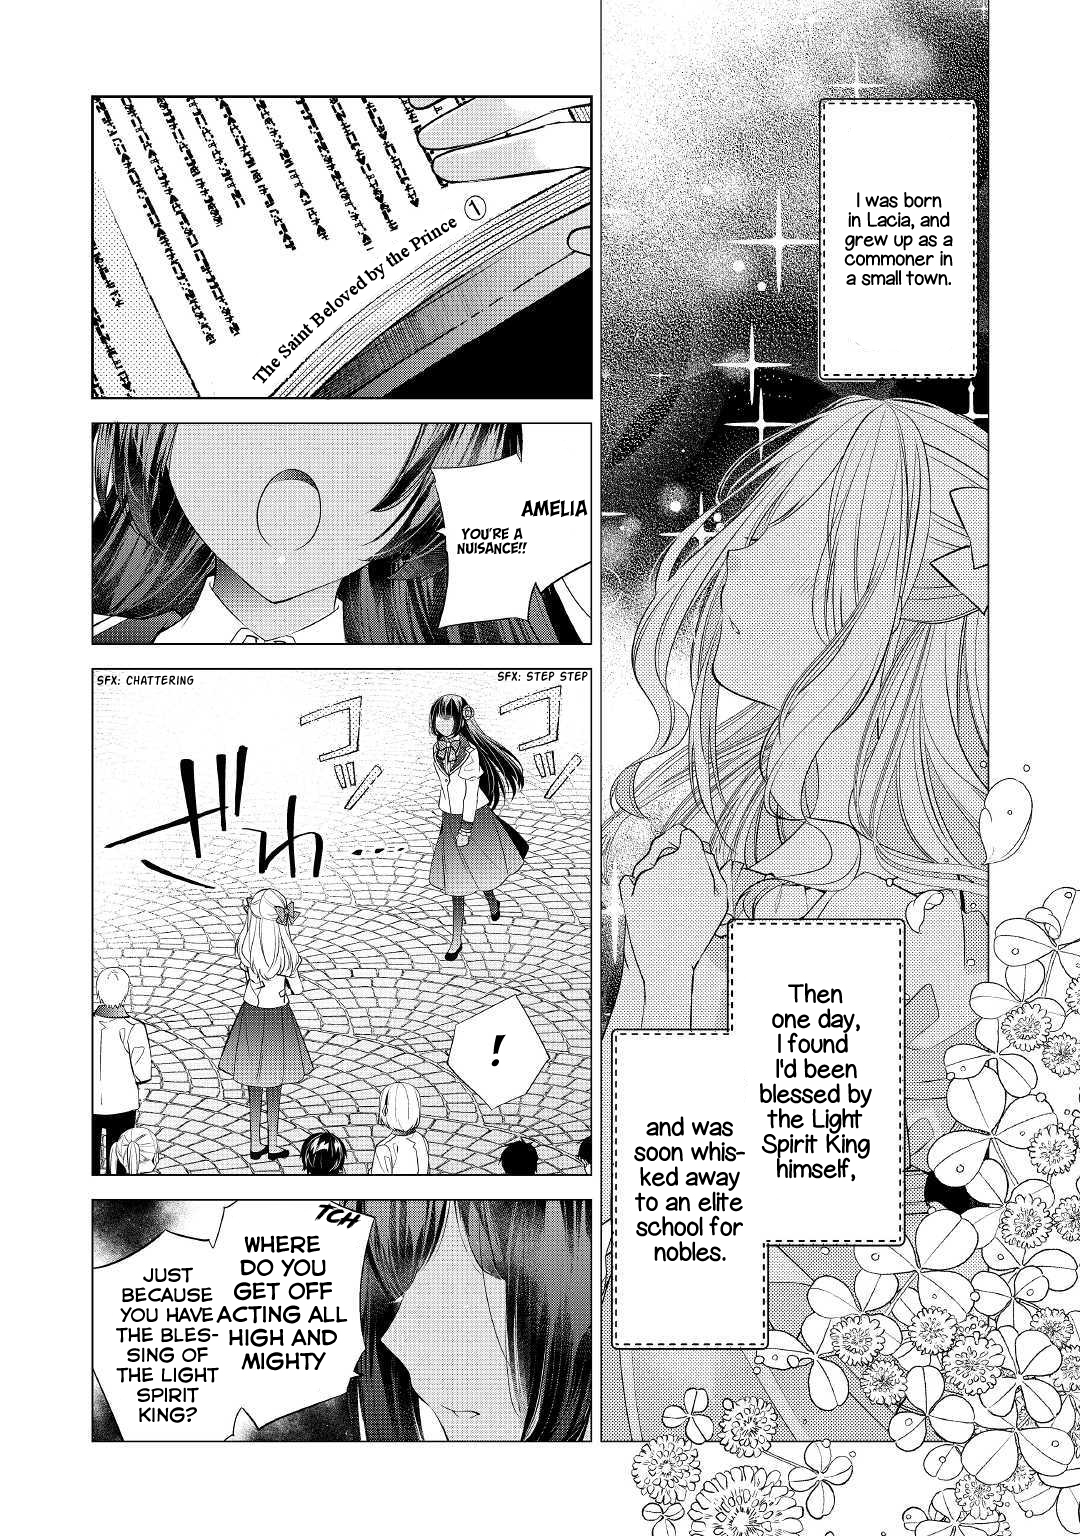 I'm Not A Villainess!! Just Because I Can Control Darkness Doesn't Mean I'm A Bad Person! Vol.1 Chapter 1 - Picture 2